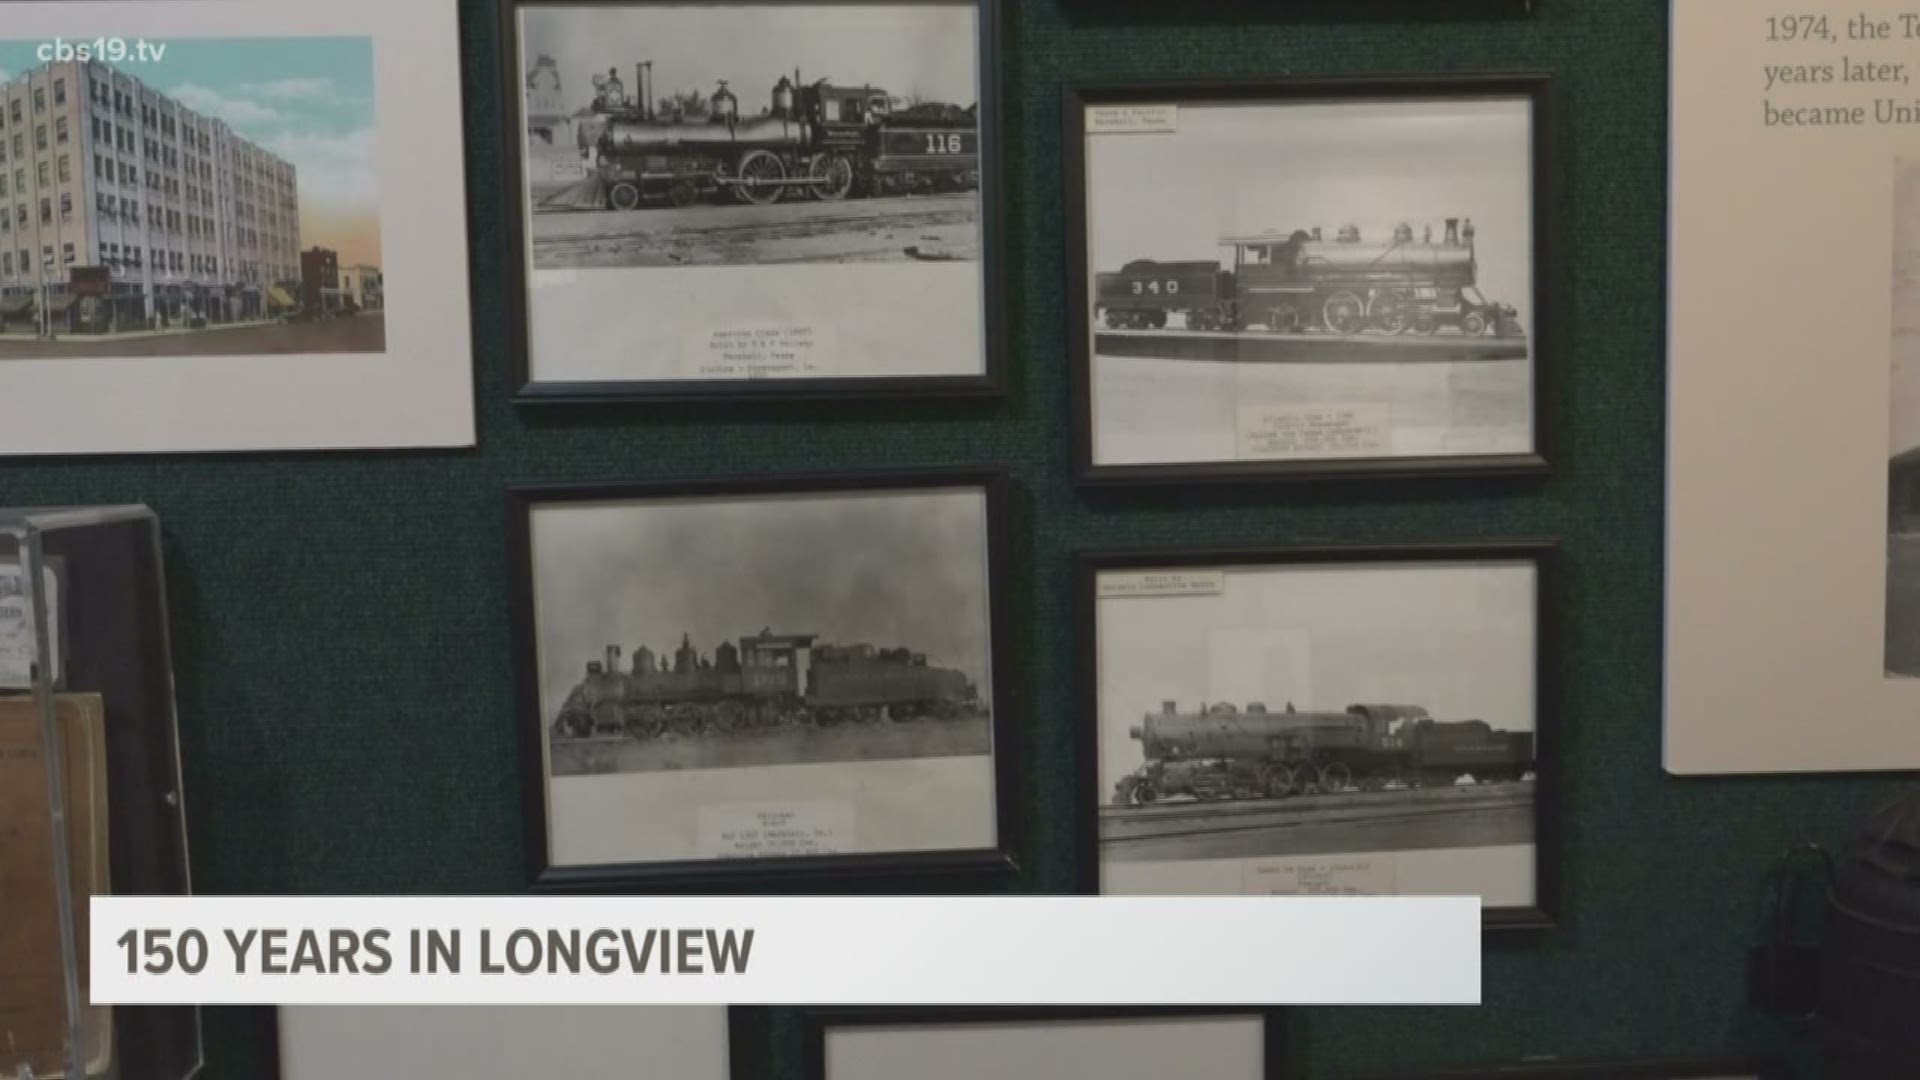 For 150 years, the city of Longview's success can described by gradual progress, playing an integral role in the development of the East Texas region.